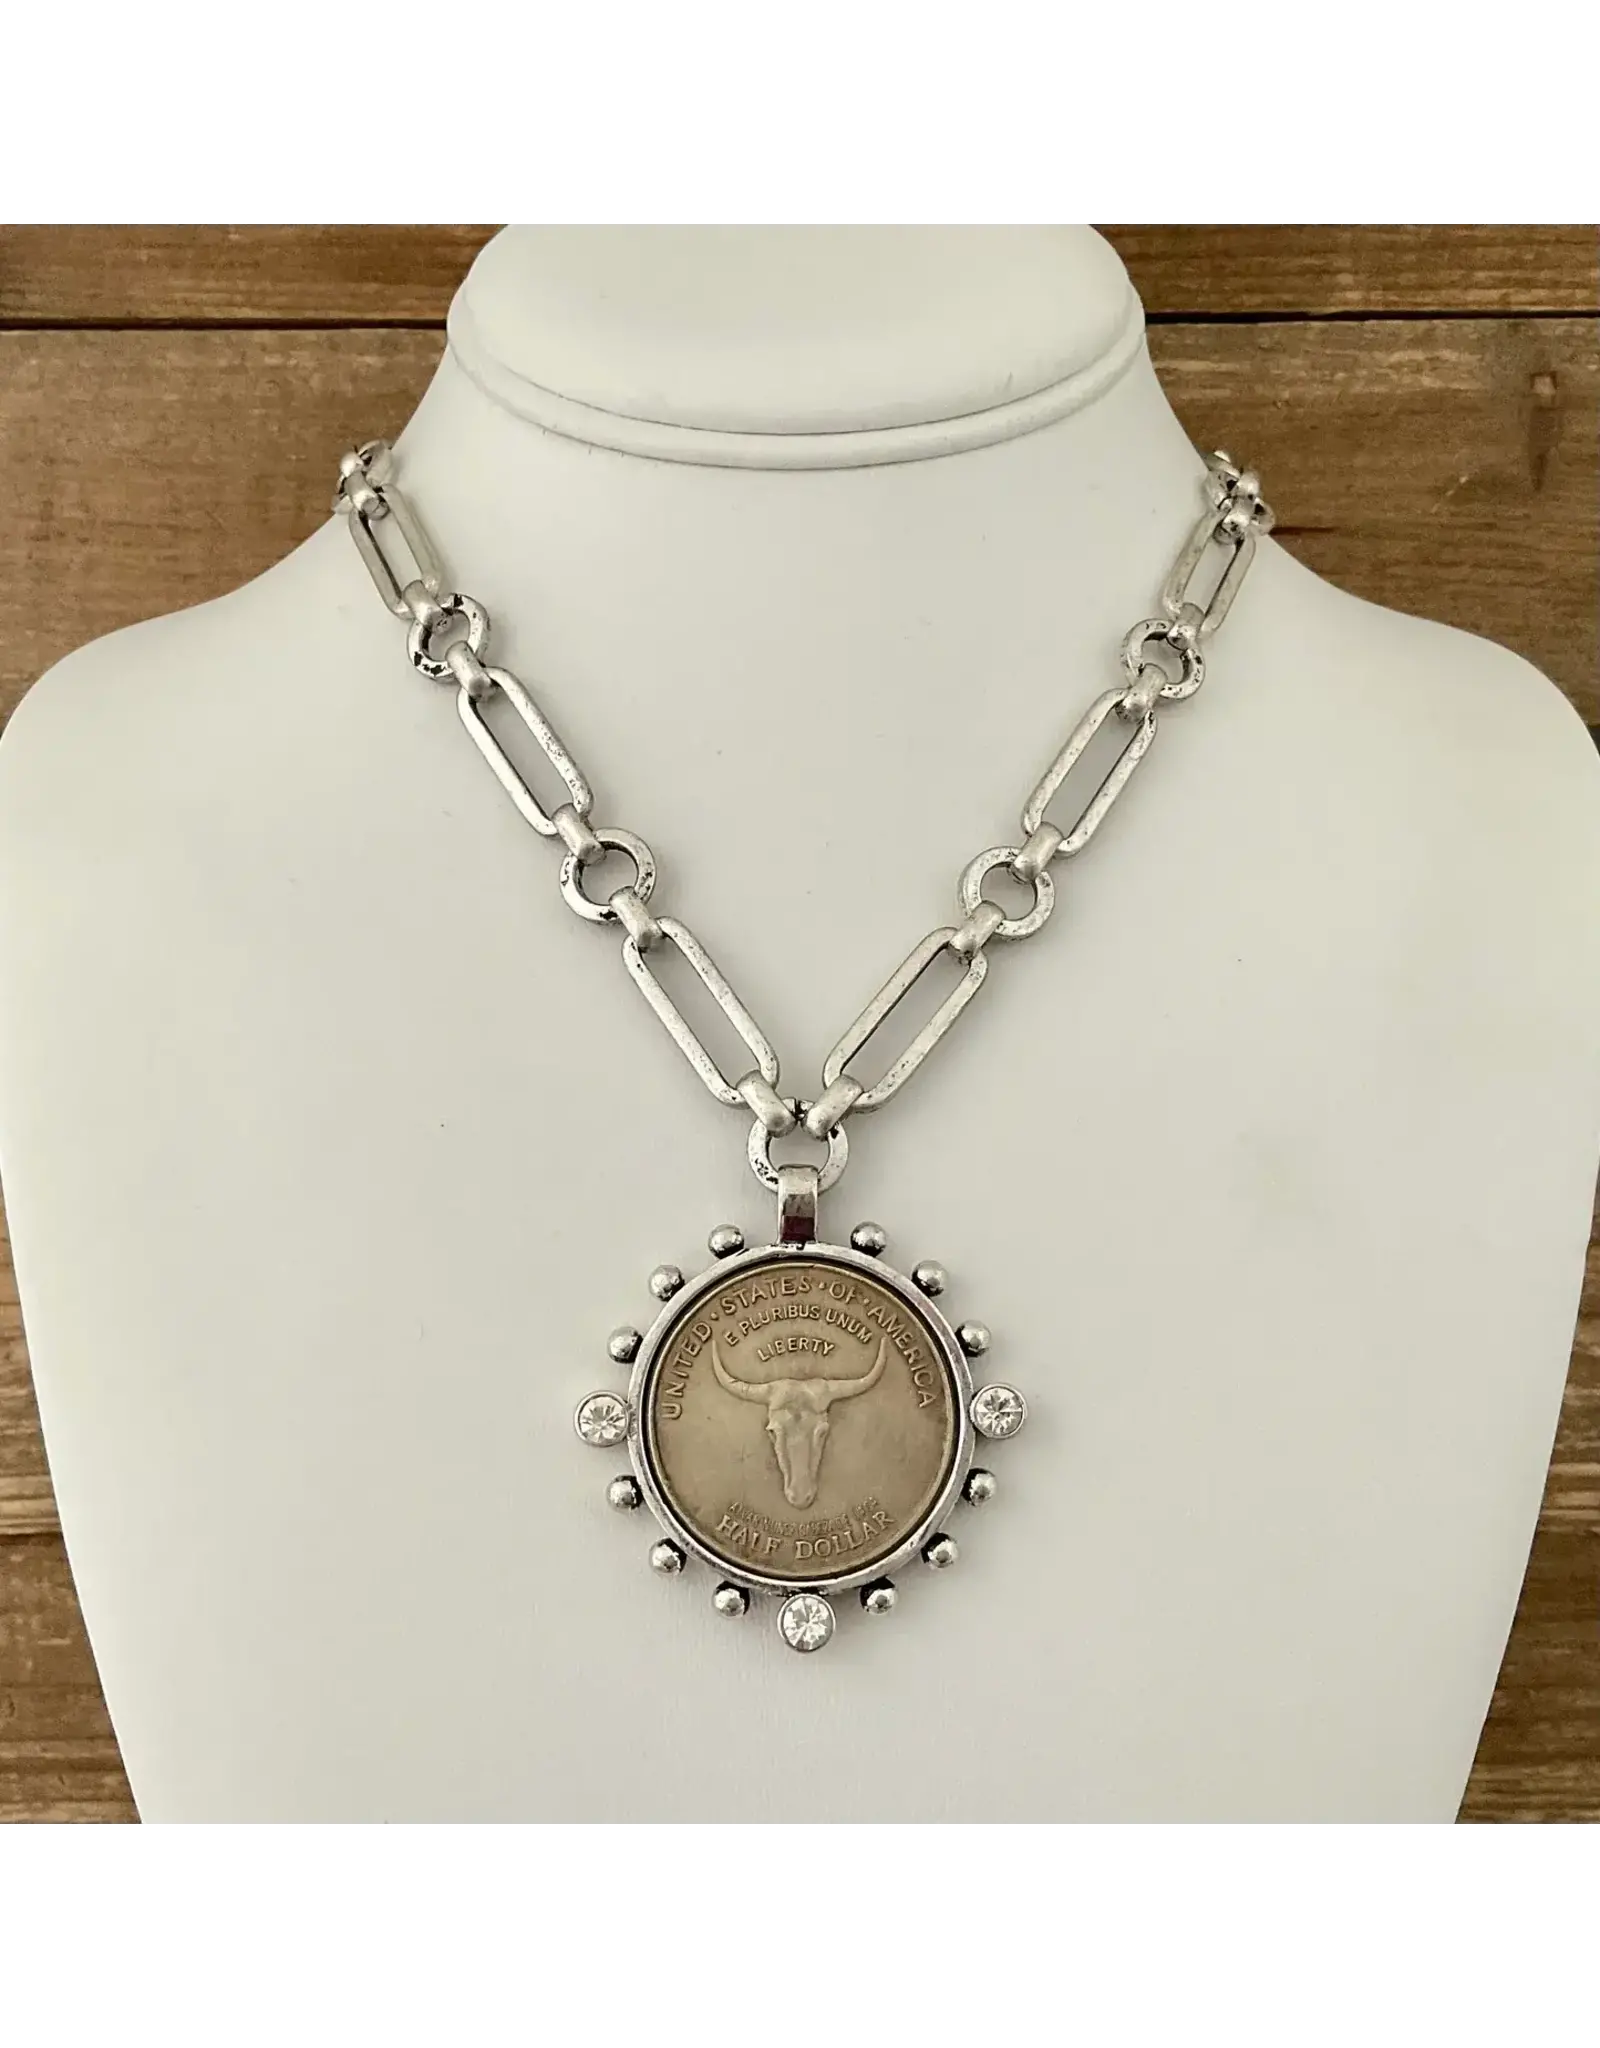 Erin Knight Designs Vintage Silver 18" Chain With Longhorn Coin